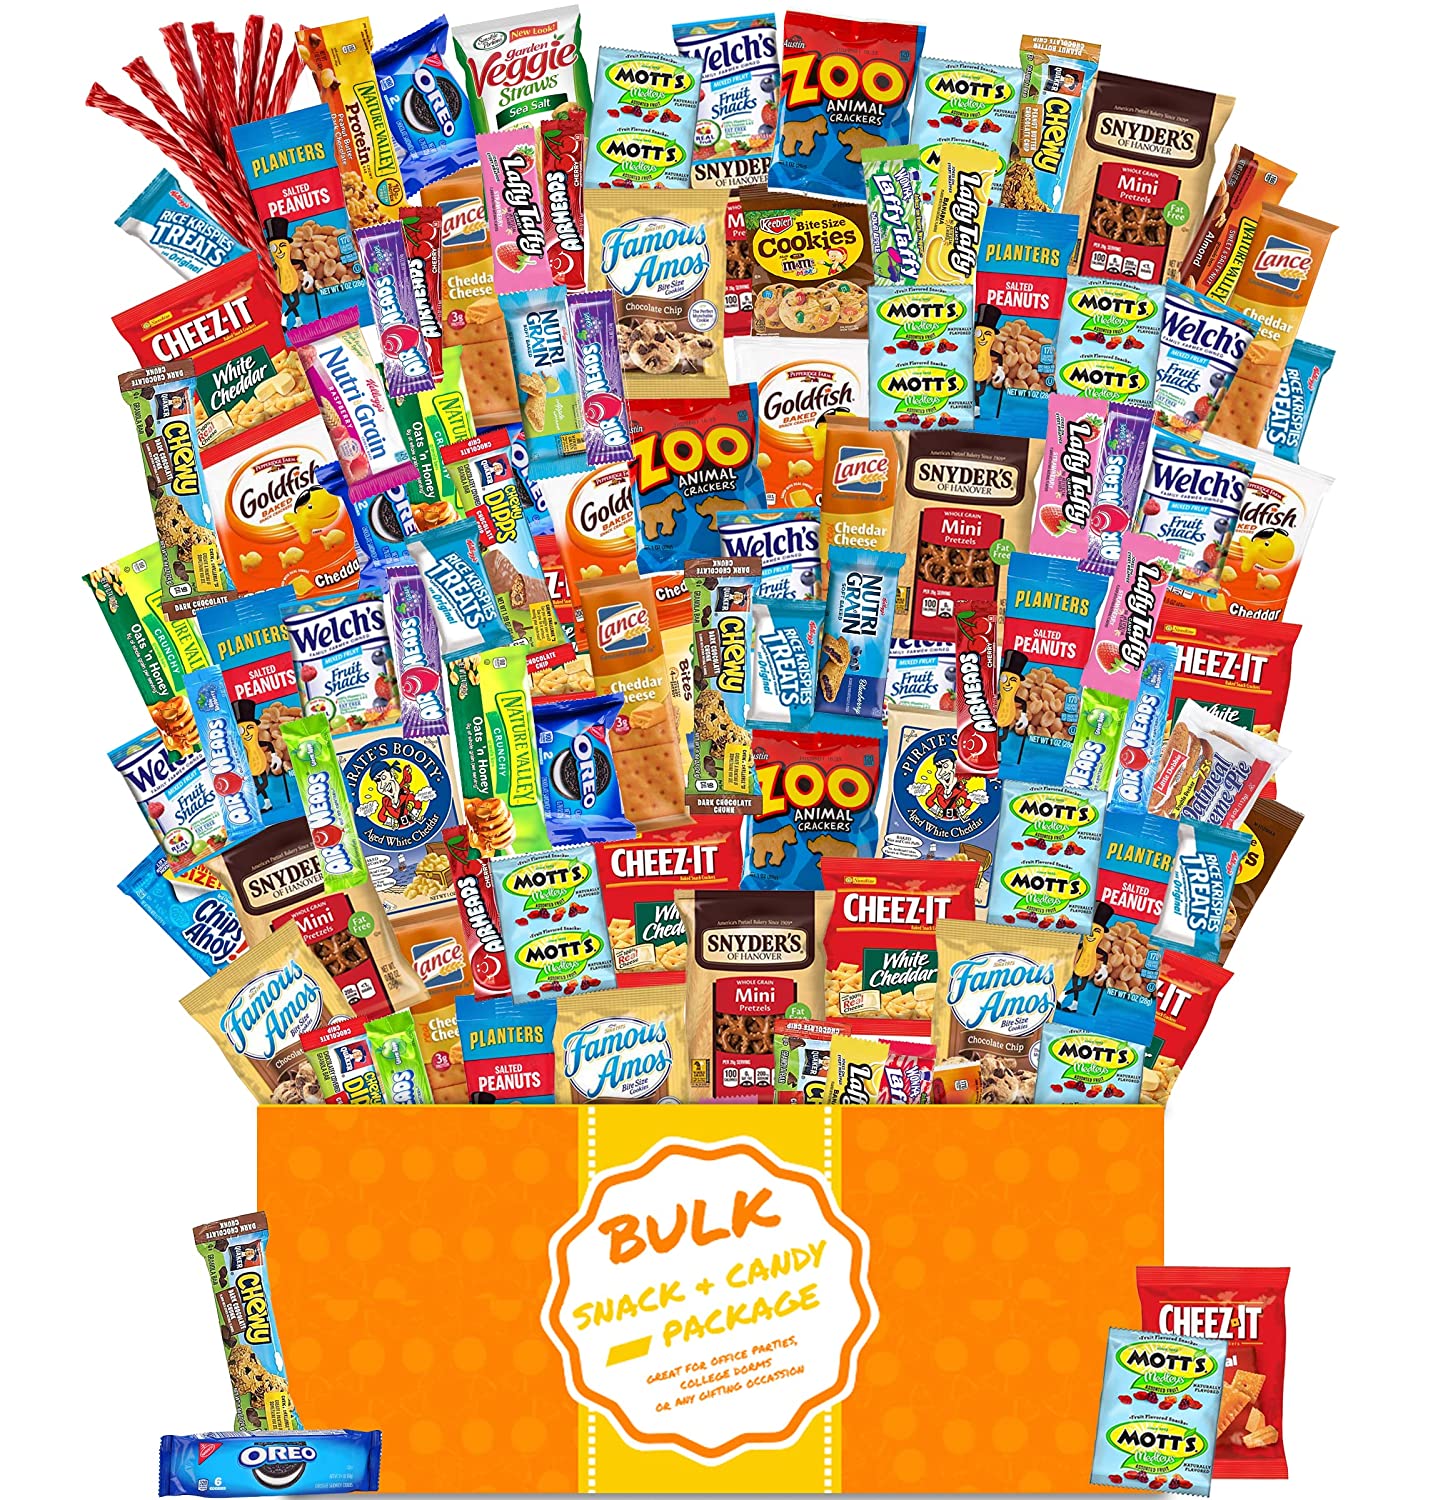 Exchange Select Square Snack Bags 100 Ct., {category}, {parent_category}